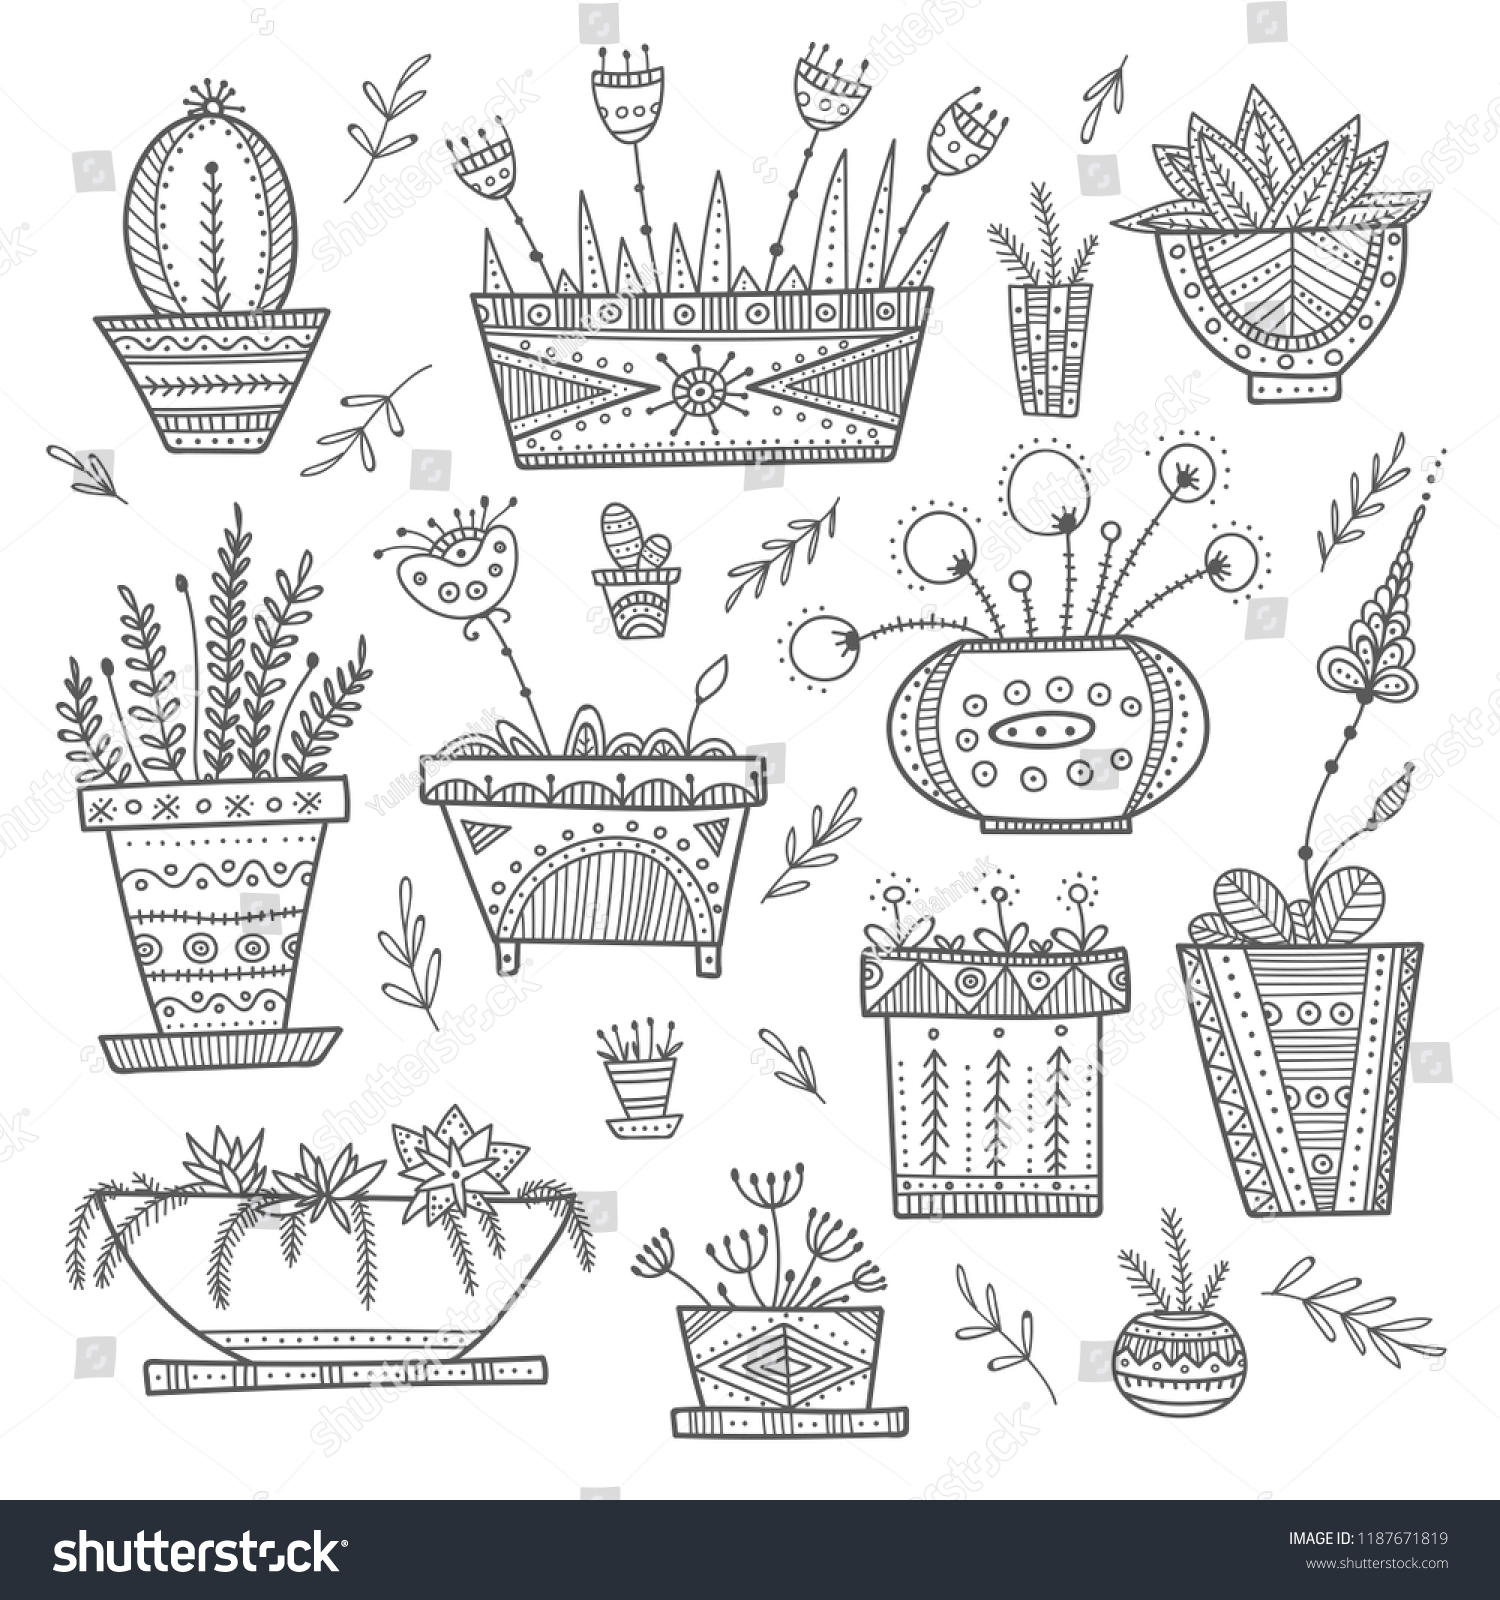 Flower pots house plants set can stock vector royalty free